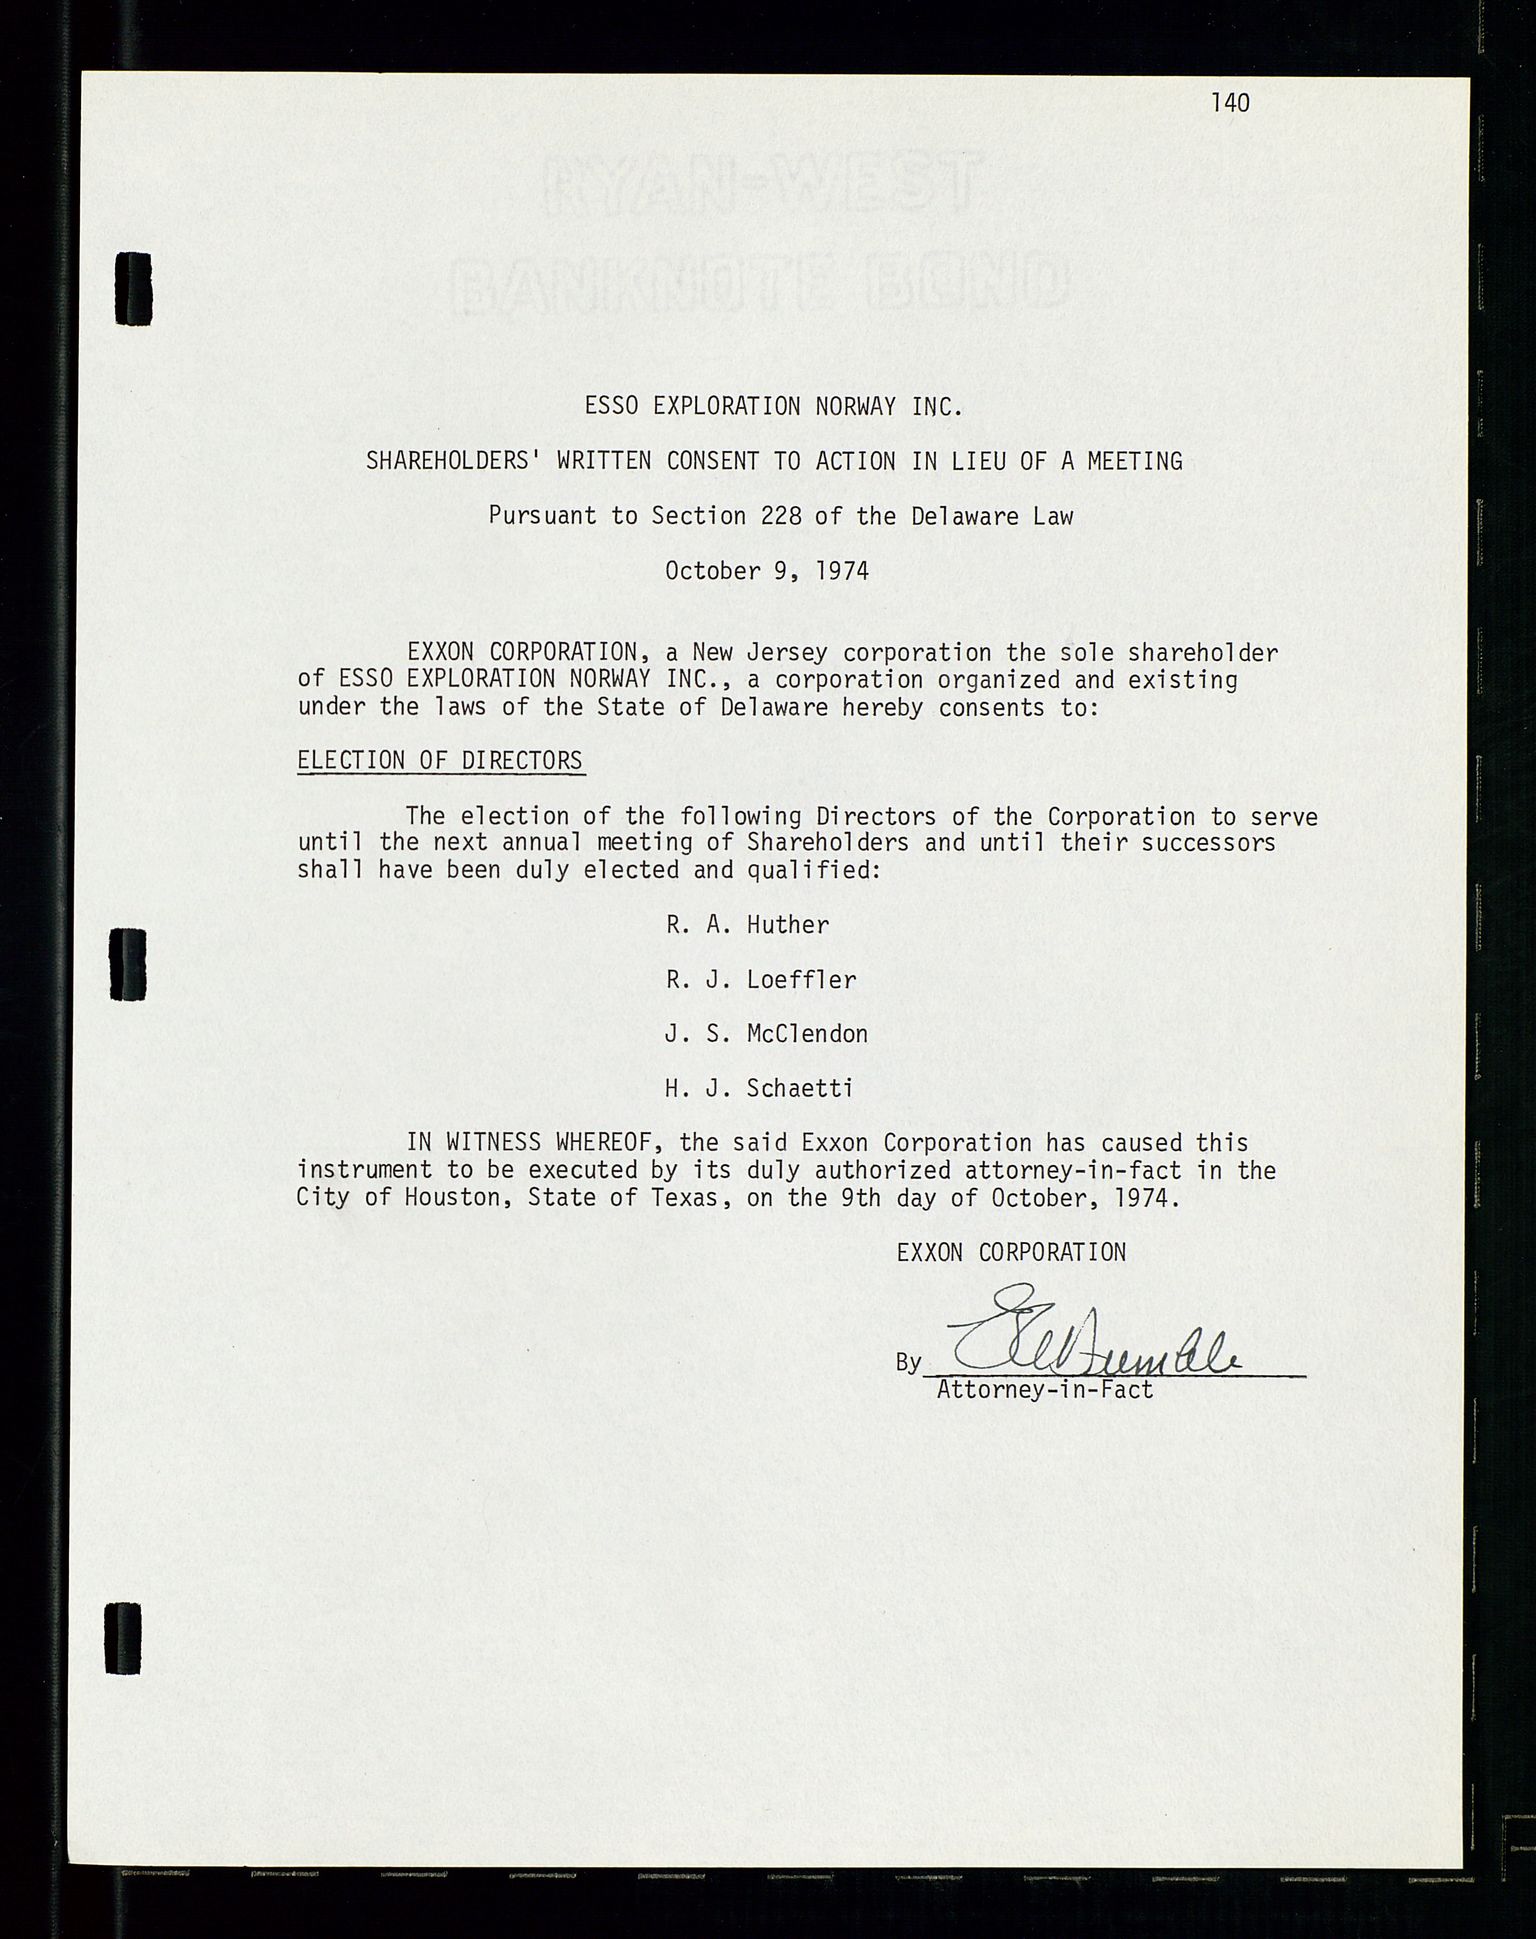 Pa 1512 - Esso Exploration and Production Norway Inc., SAST/A-101917/A/Aa/L0001/0001: Styredokumenter / Corporate records, By-Laws, Board meeting minutes, Incorporations, 1965-1975, p. 140